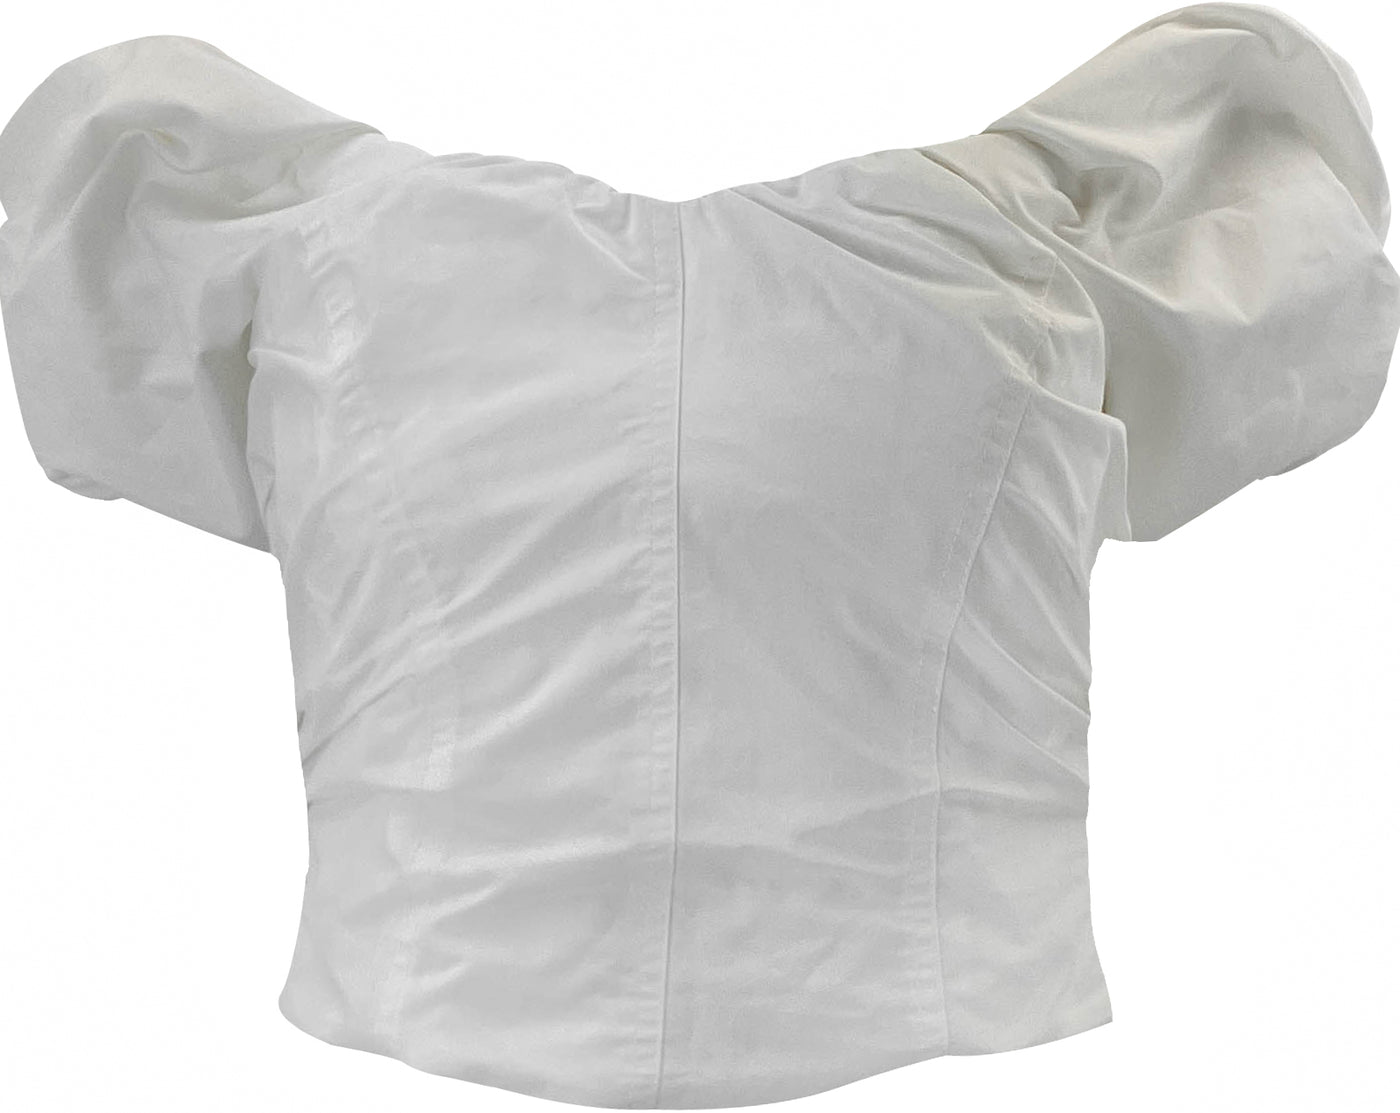 A.L.C. Nora Puff-Sleeve Bustier Top in White - Discounts on A.L.C. at UAL